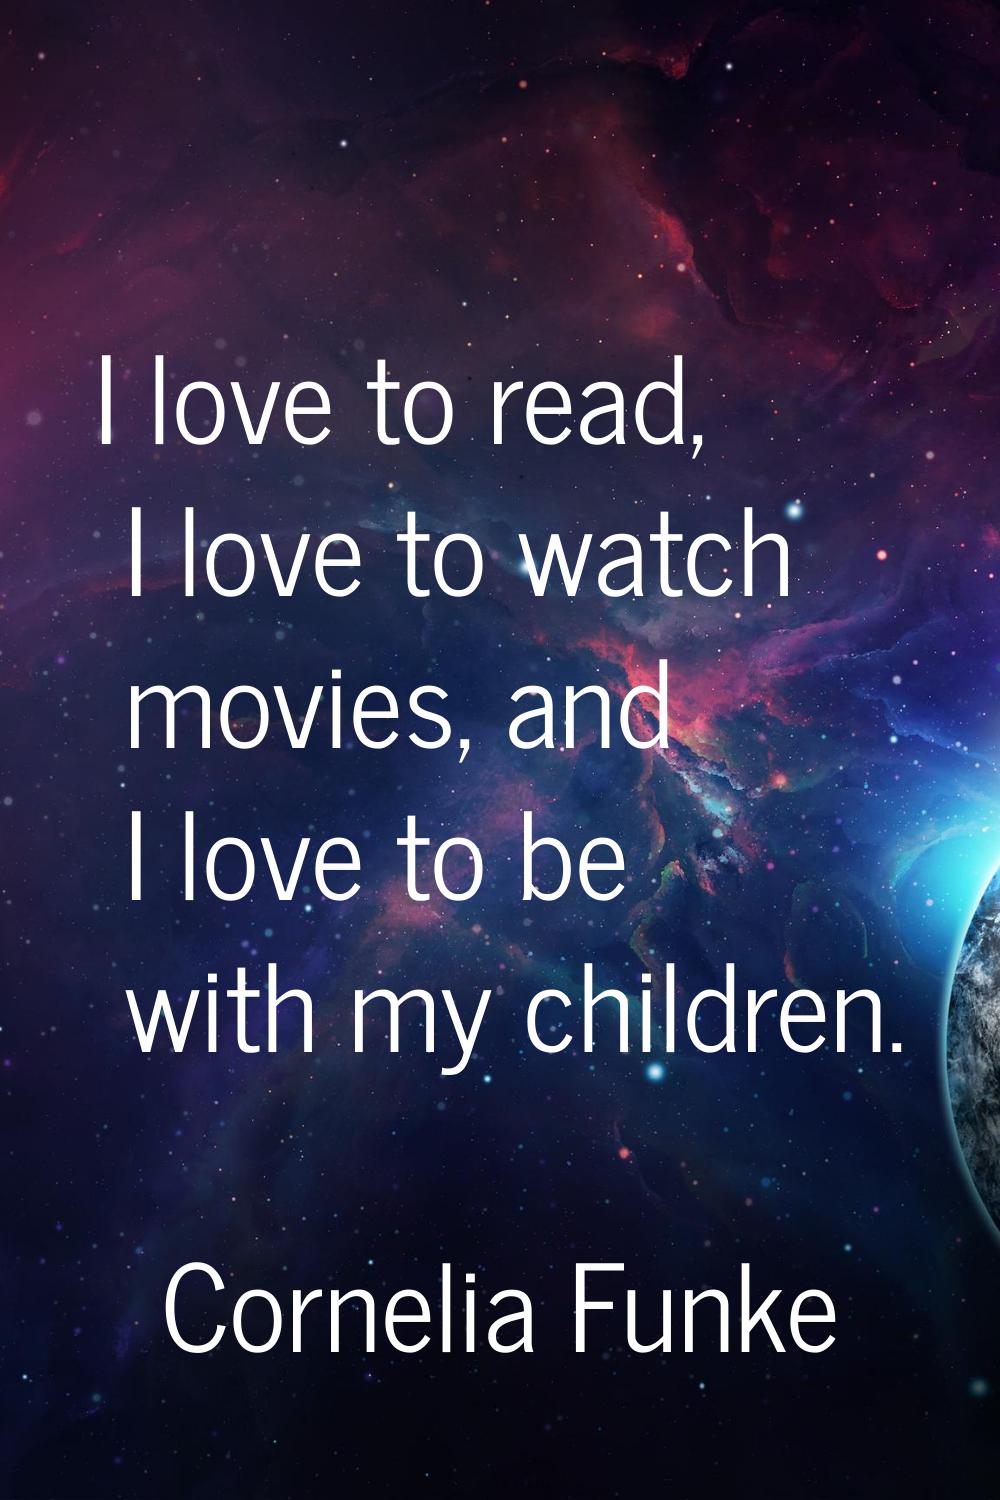 I love to read, I love to watch movies, and I love to be with my children.